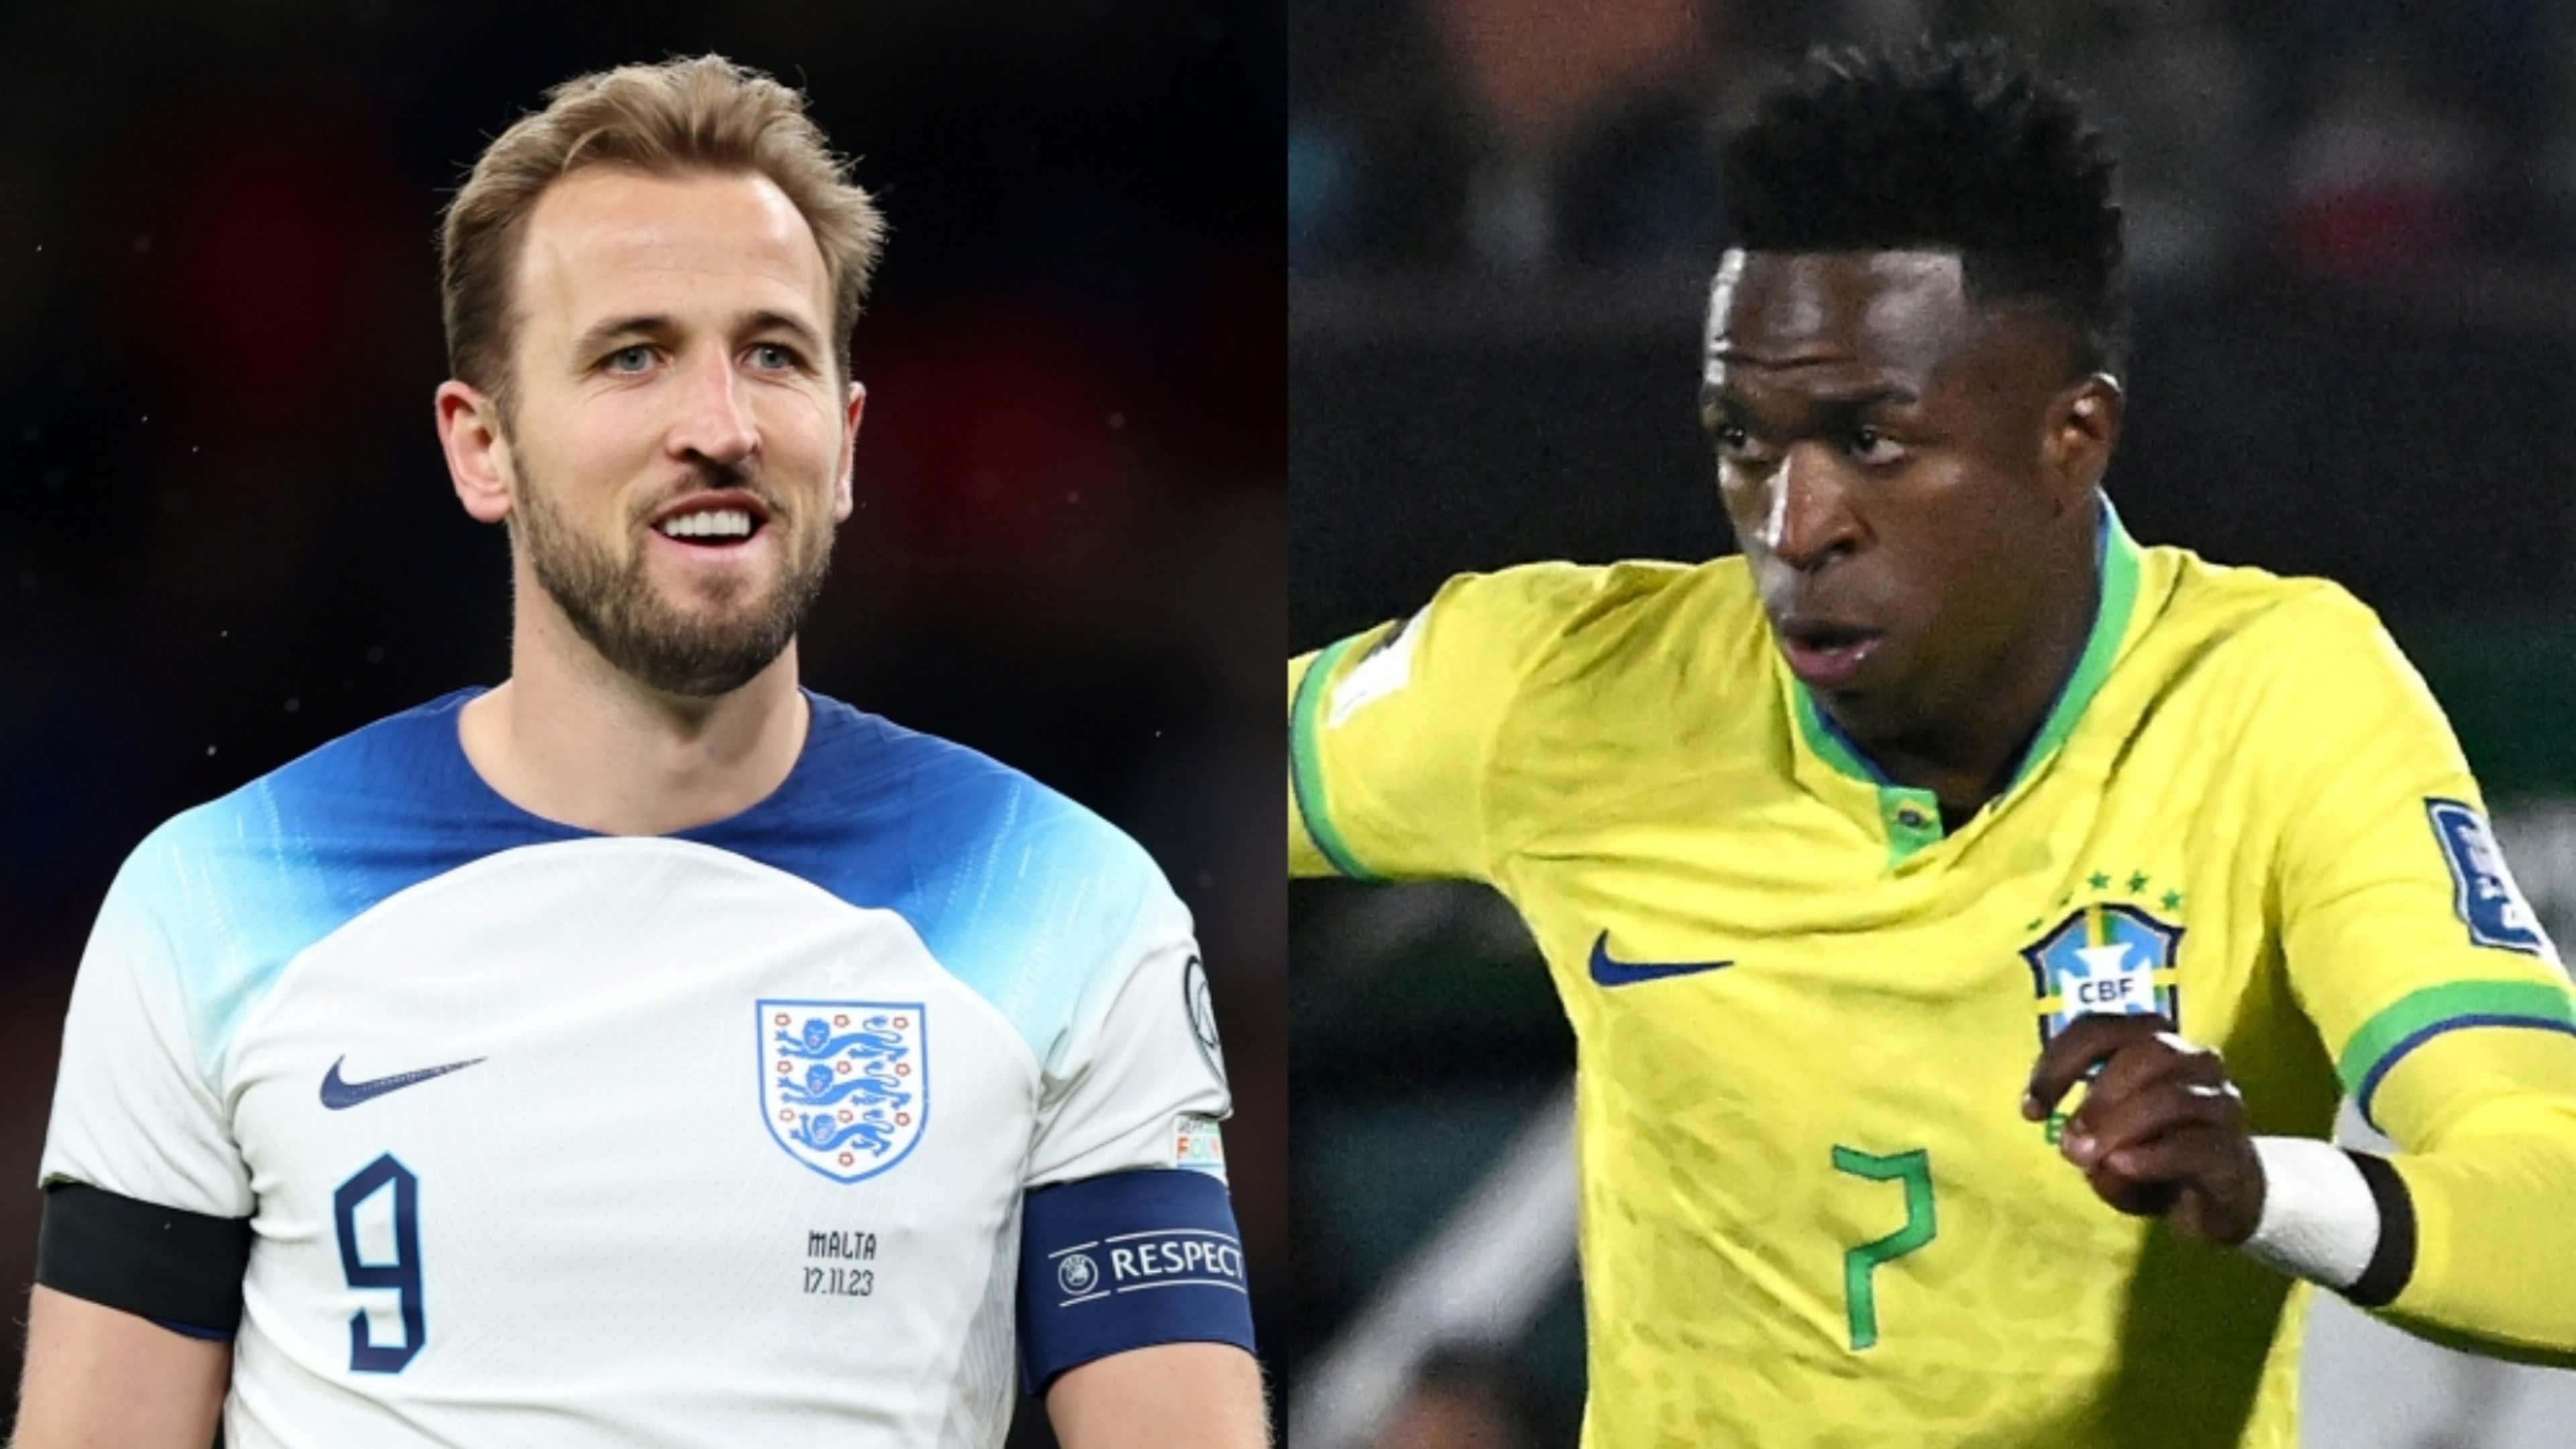 Why Brazil won't be wearing their iconic yellow shirts against England in  Wembley friendly - explained